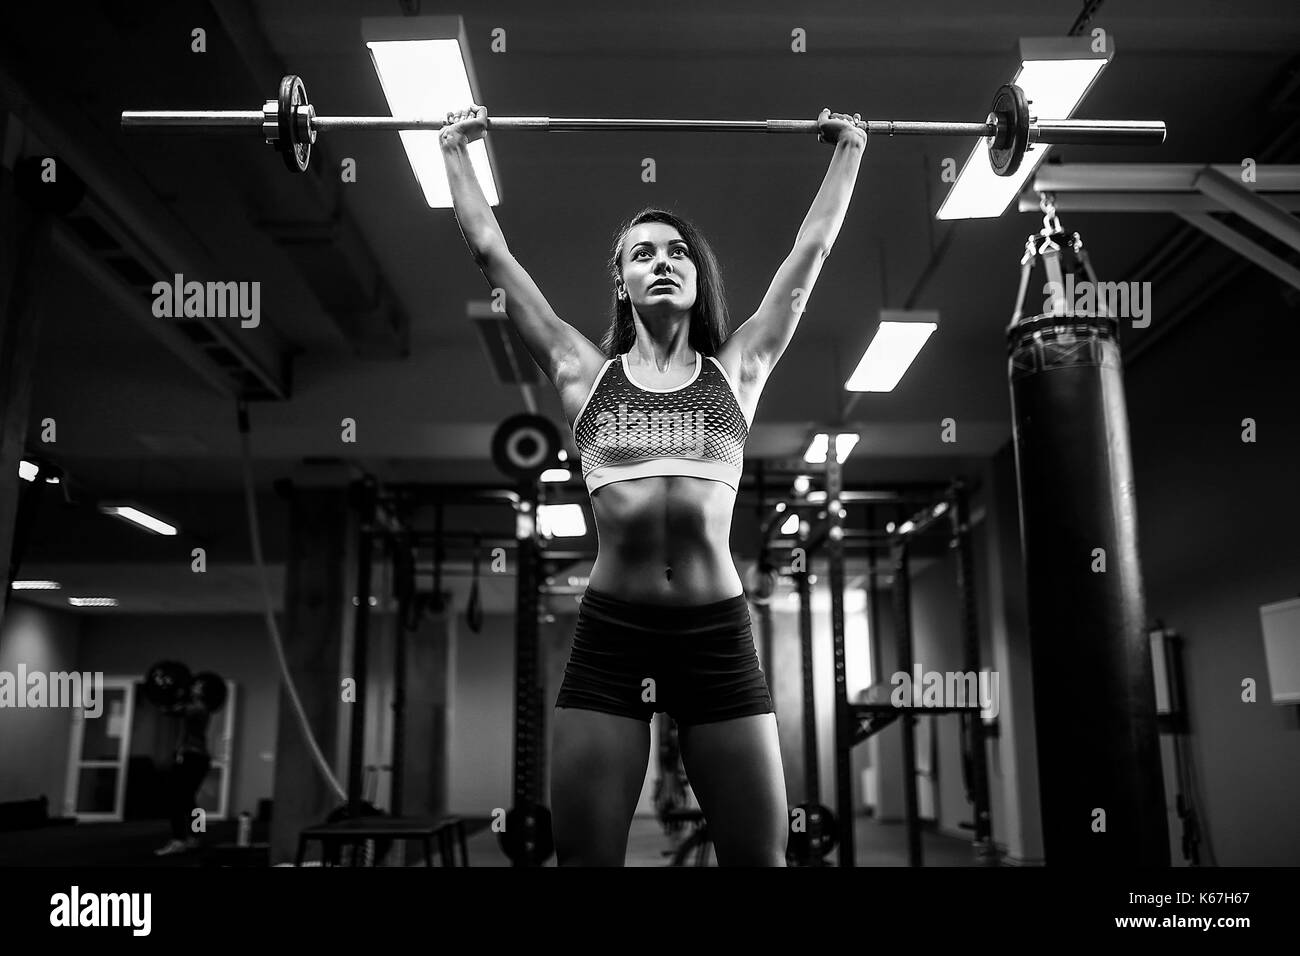 woman lifting a weight crossfit in the gym. Fitness woman deadlift barbell. Stock Photo